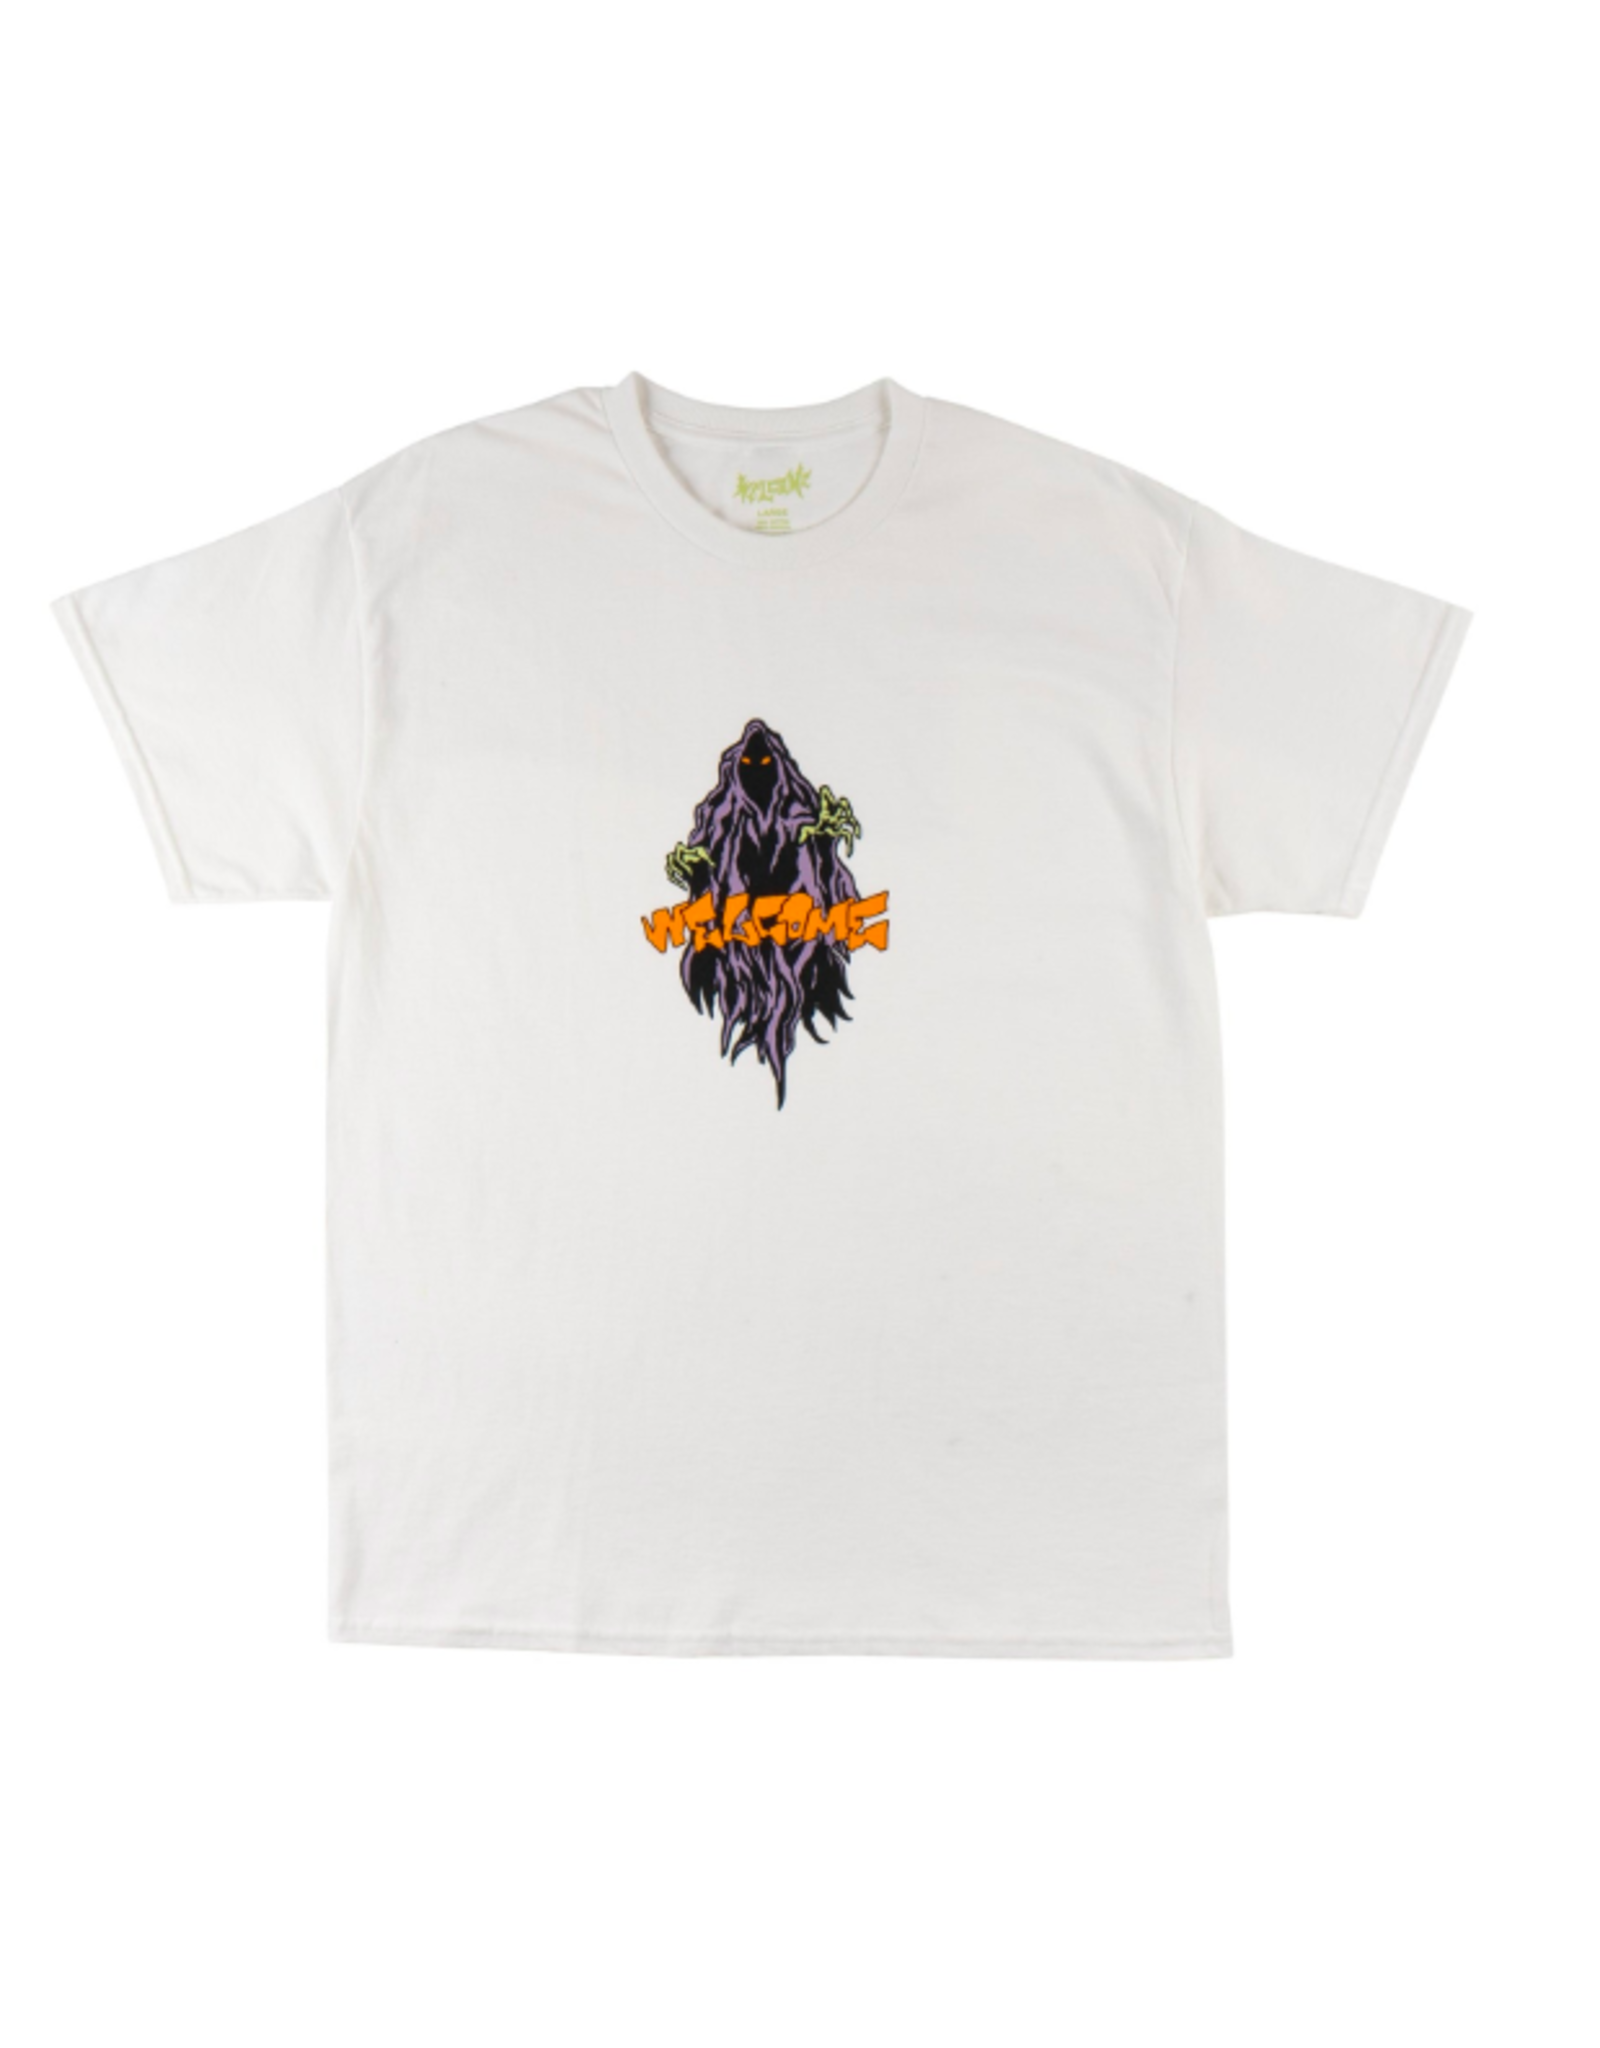 Welcome Men's Ghoul Tee White